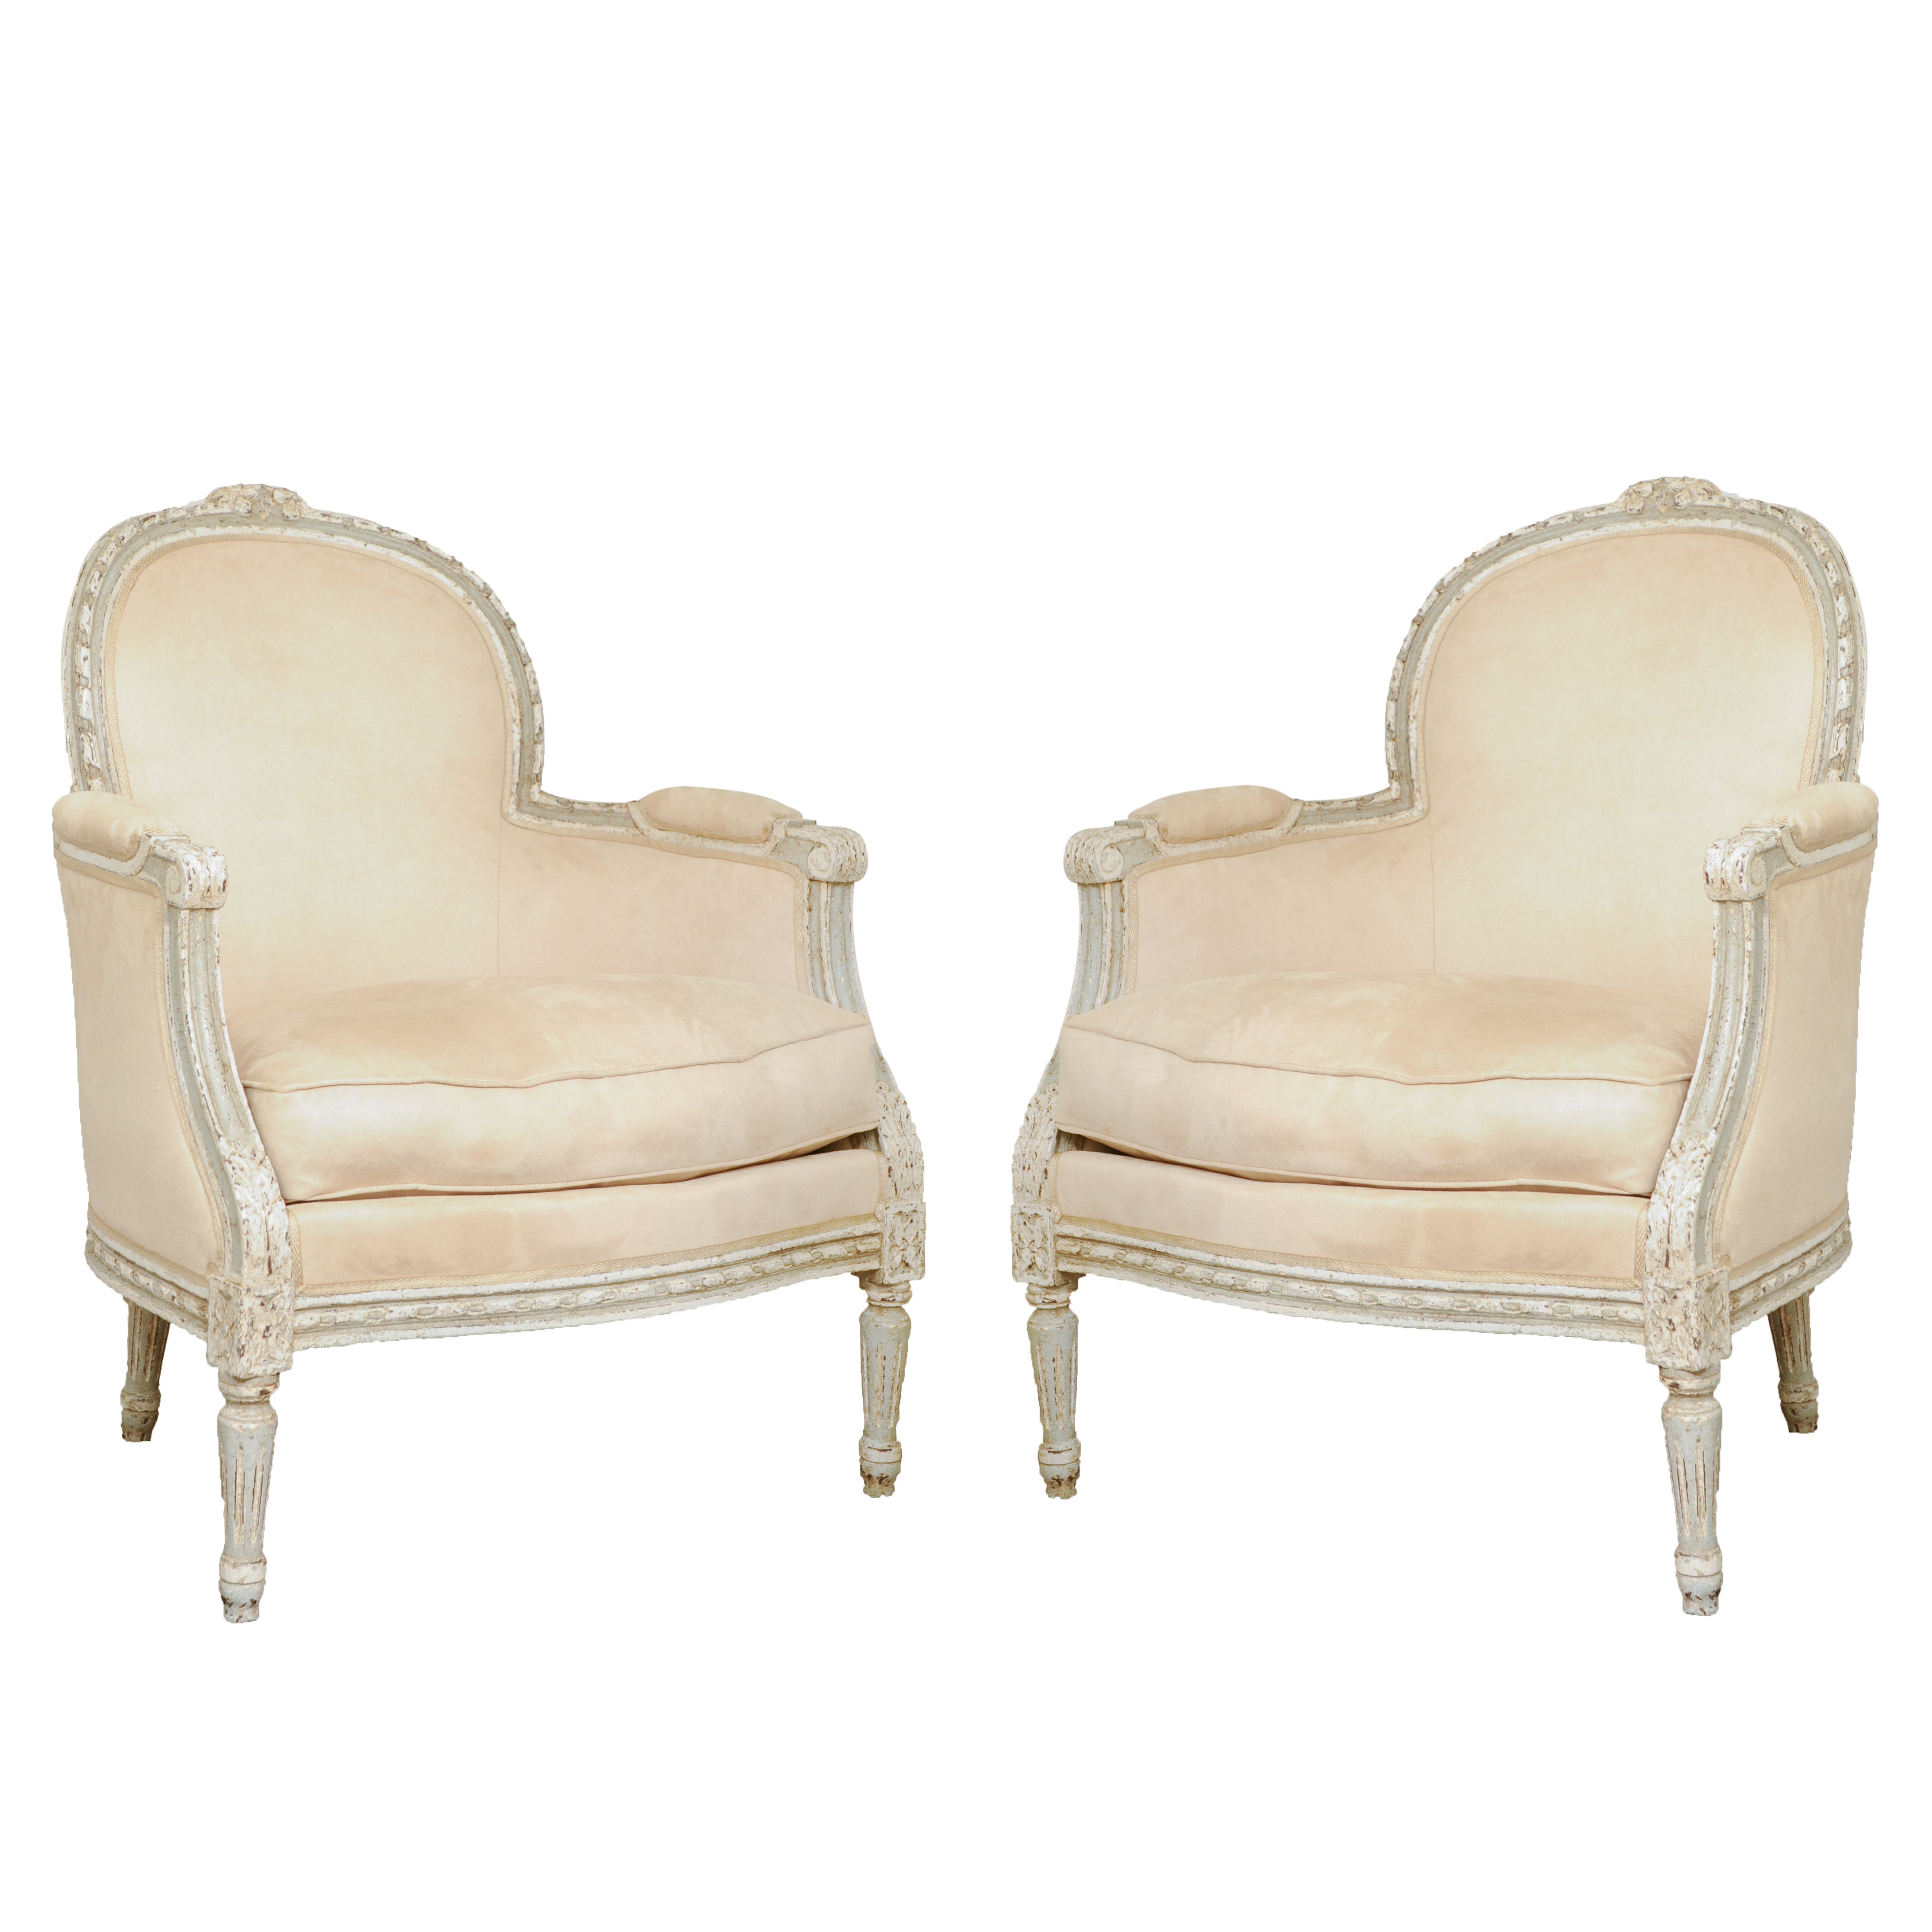 A Pair of 19th Century French Armchairs